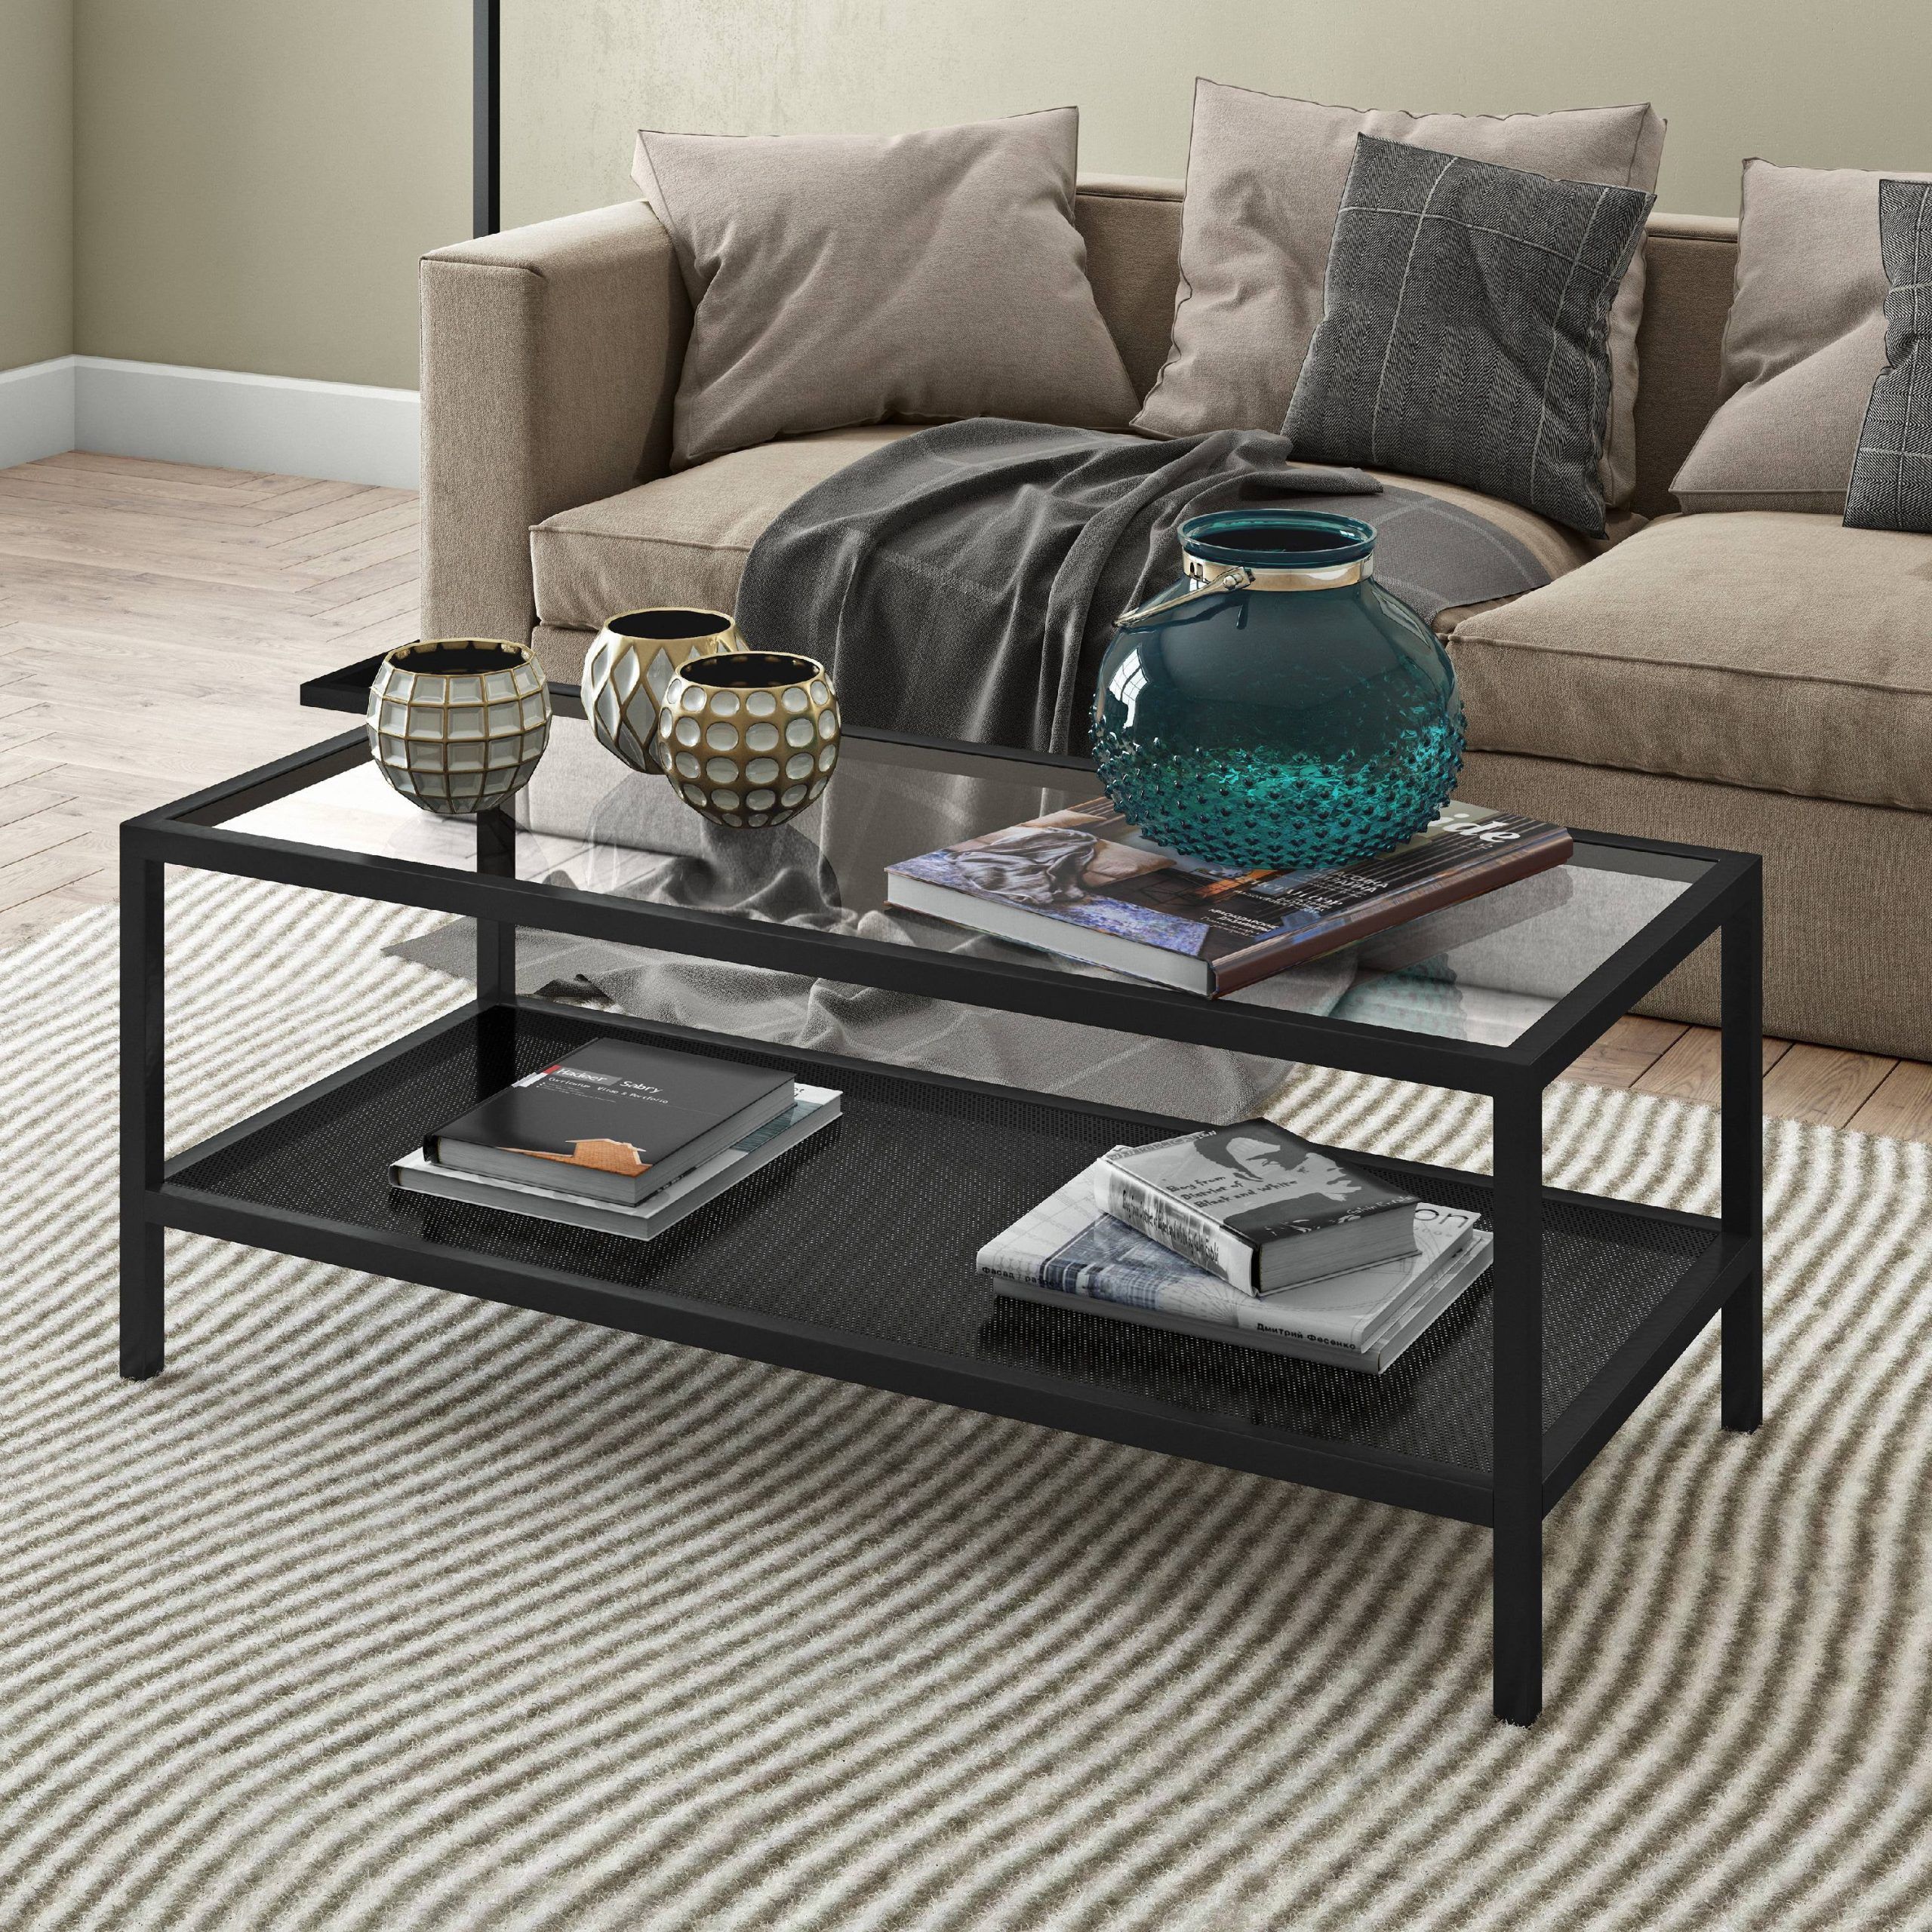 Evelyn&zoe Contemporary Metal Coffee Table With Glass Top – Walmart Intended For Glossy Finished Metal Coffee Tables (Gallery 4 of 20)